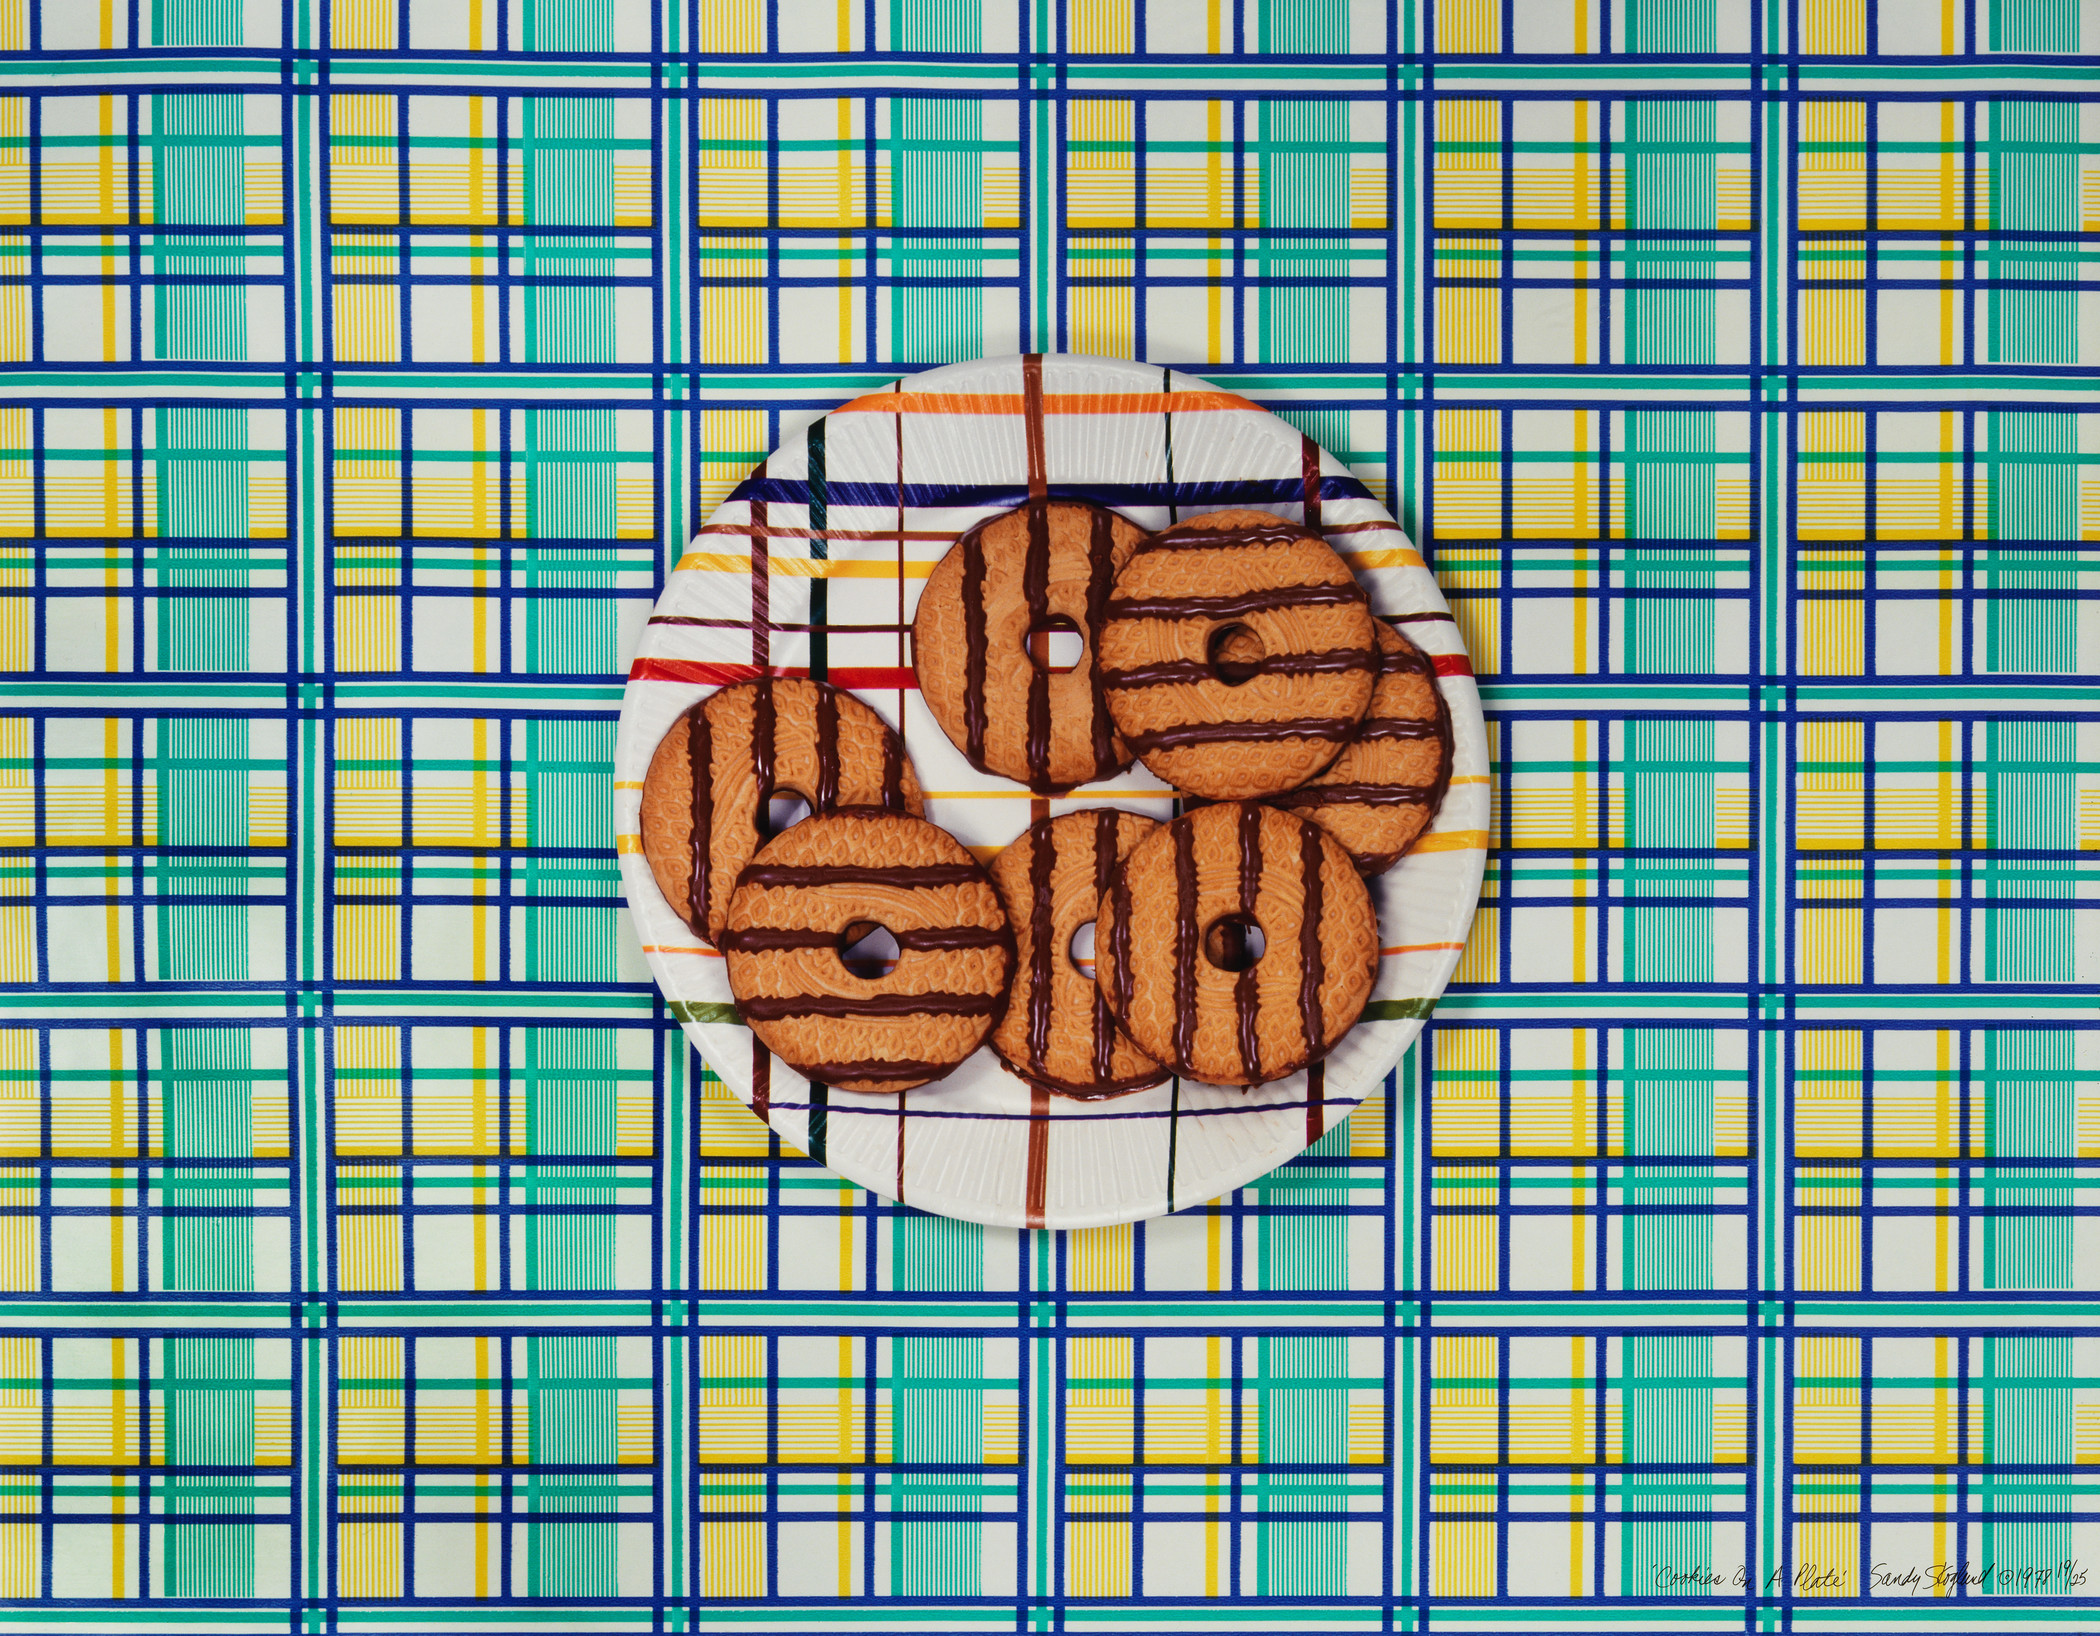 Striped cookies on a striped plate against striped background